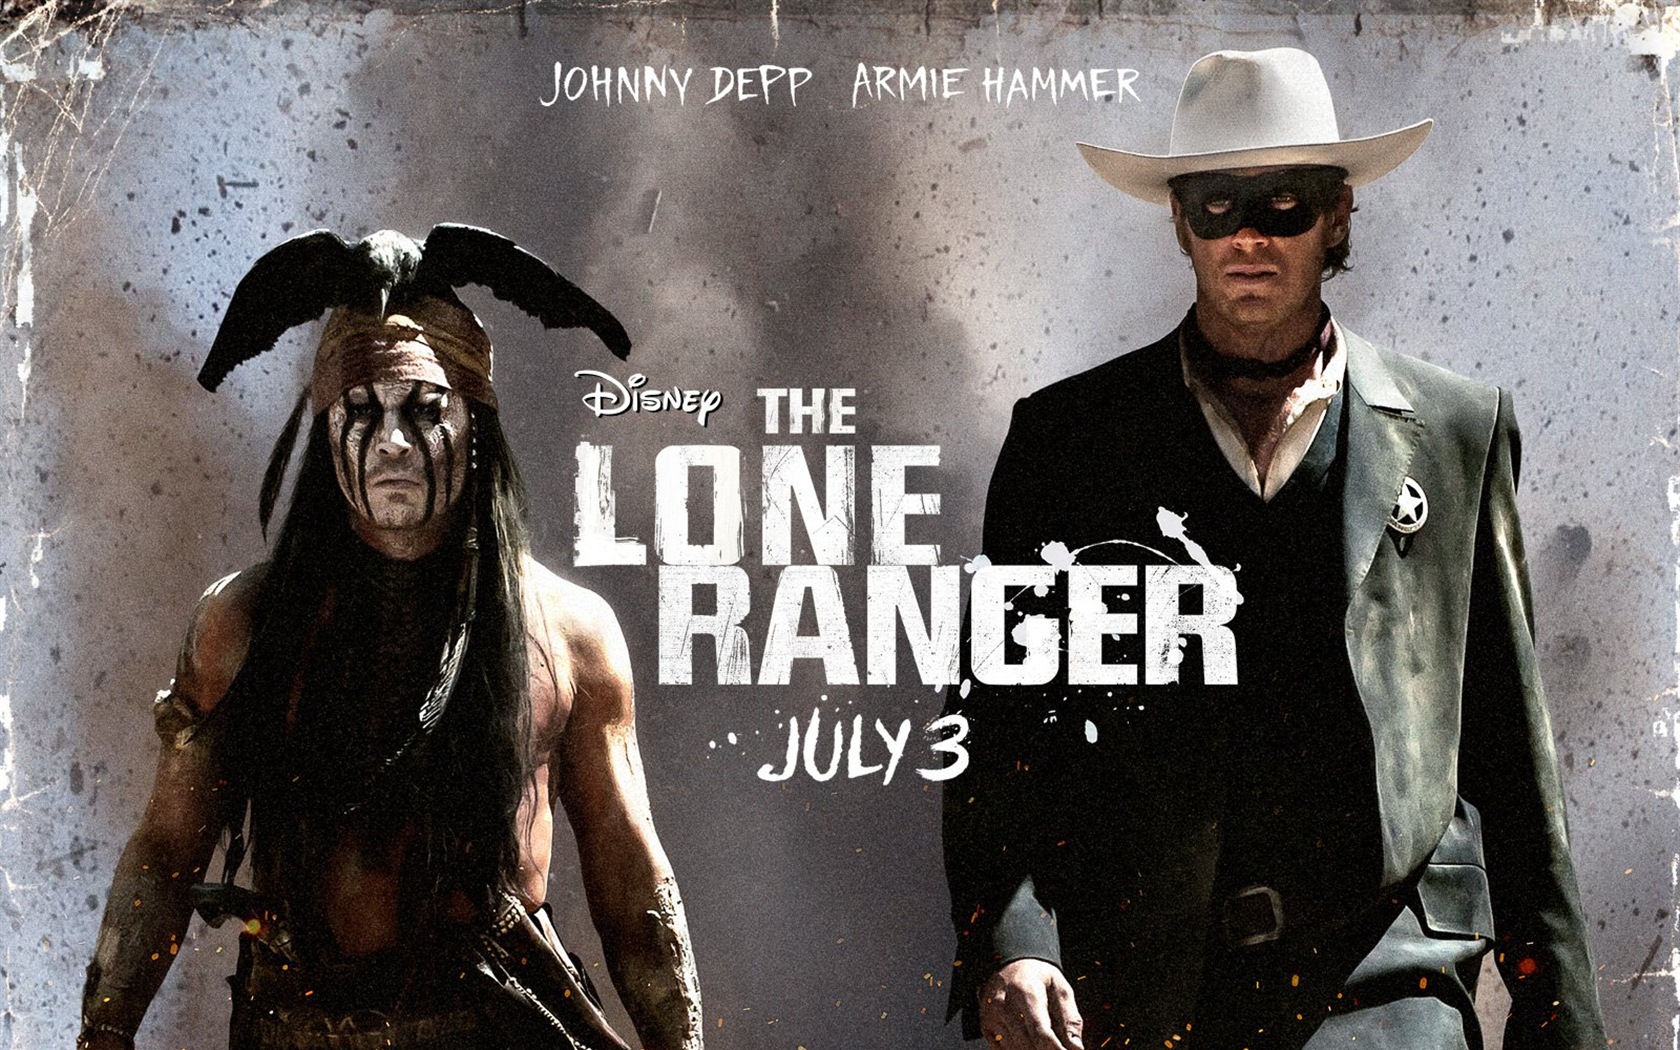 The Lone Ranger HD movie wallpapers #6 - 1680x1050